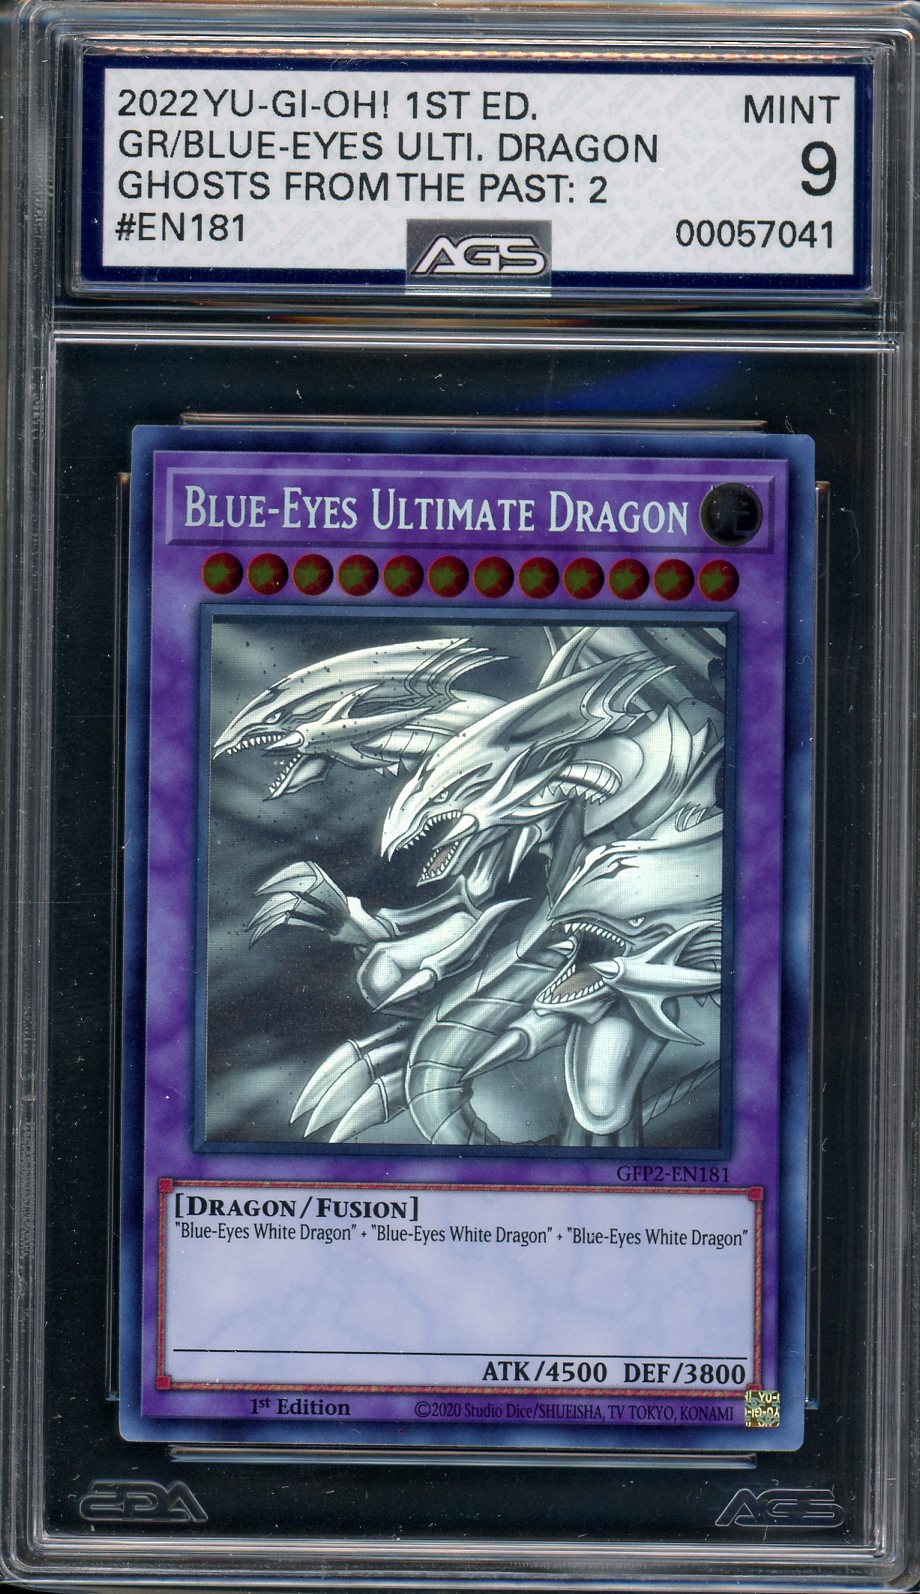 AGS (MINT 9) Blue-Eyes Ultimate Dragon #EN181 - Ghosts From The Past The 2nd Haunting (#00057041)